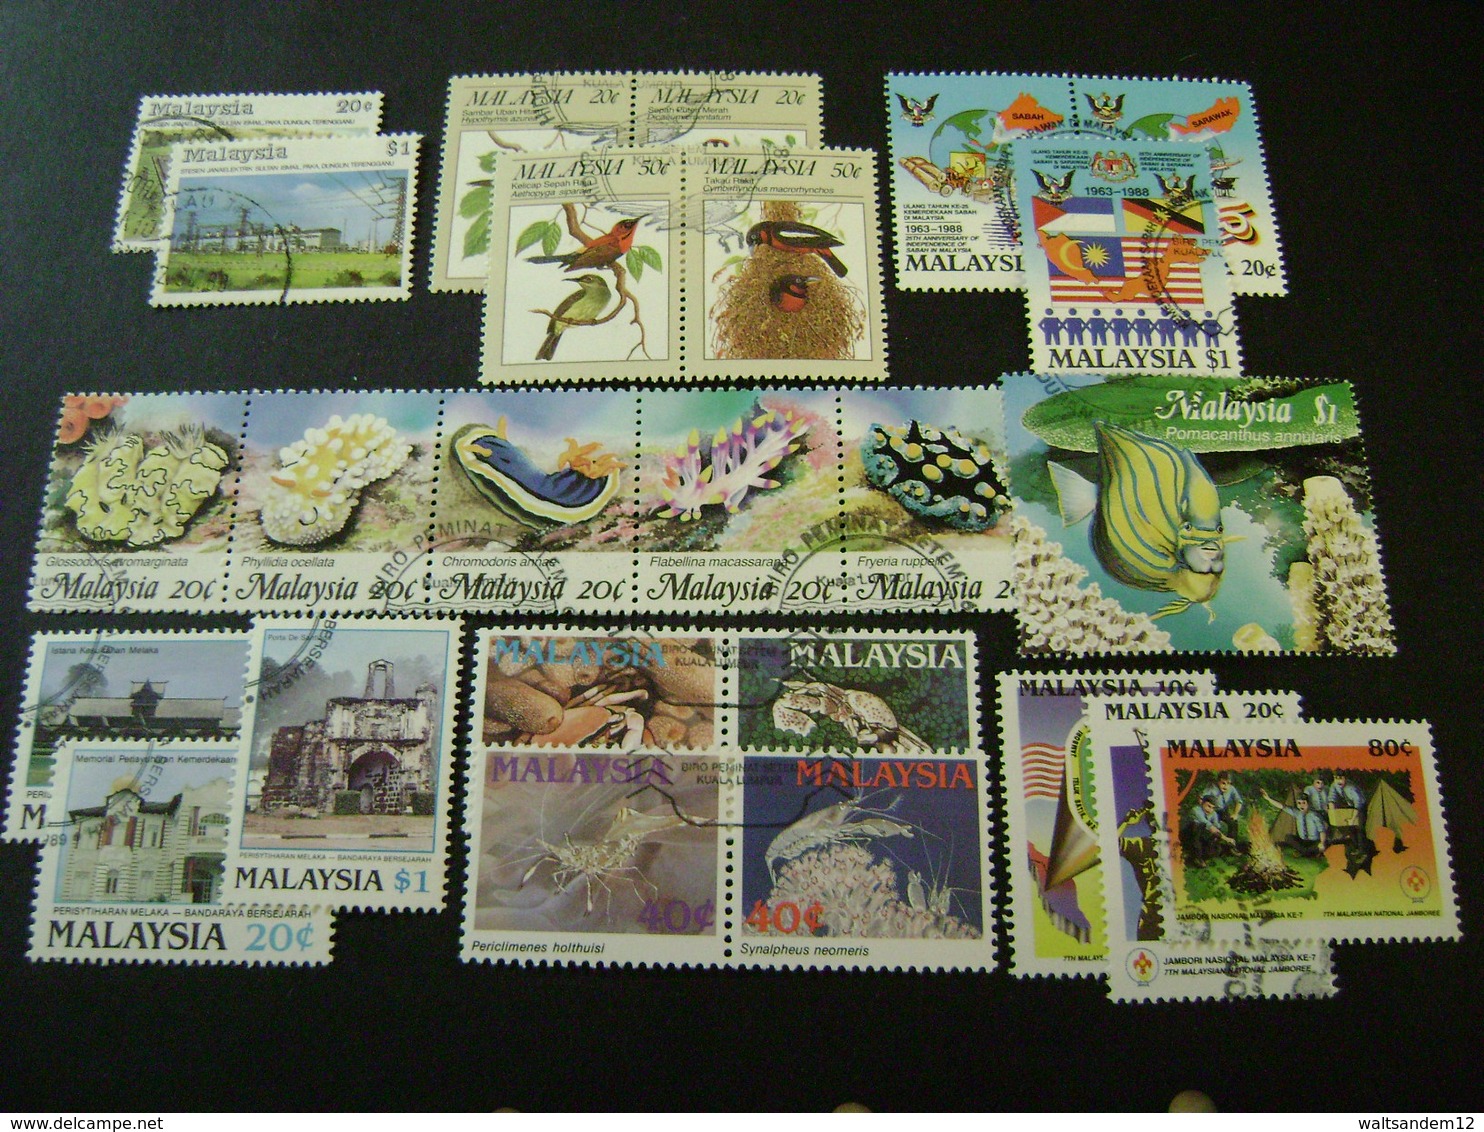 Malaysia 1986-1989 Complete Stamp Issues (SG 331-431) 4 Images - Used [Sale Price] - Malaysia (1964-...)